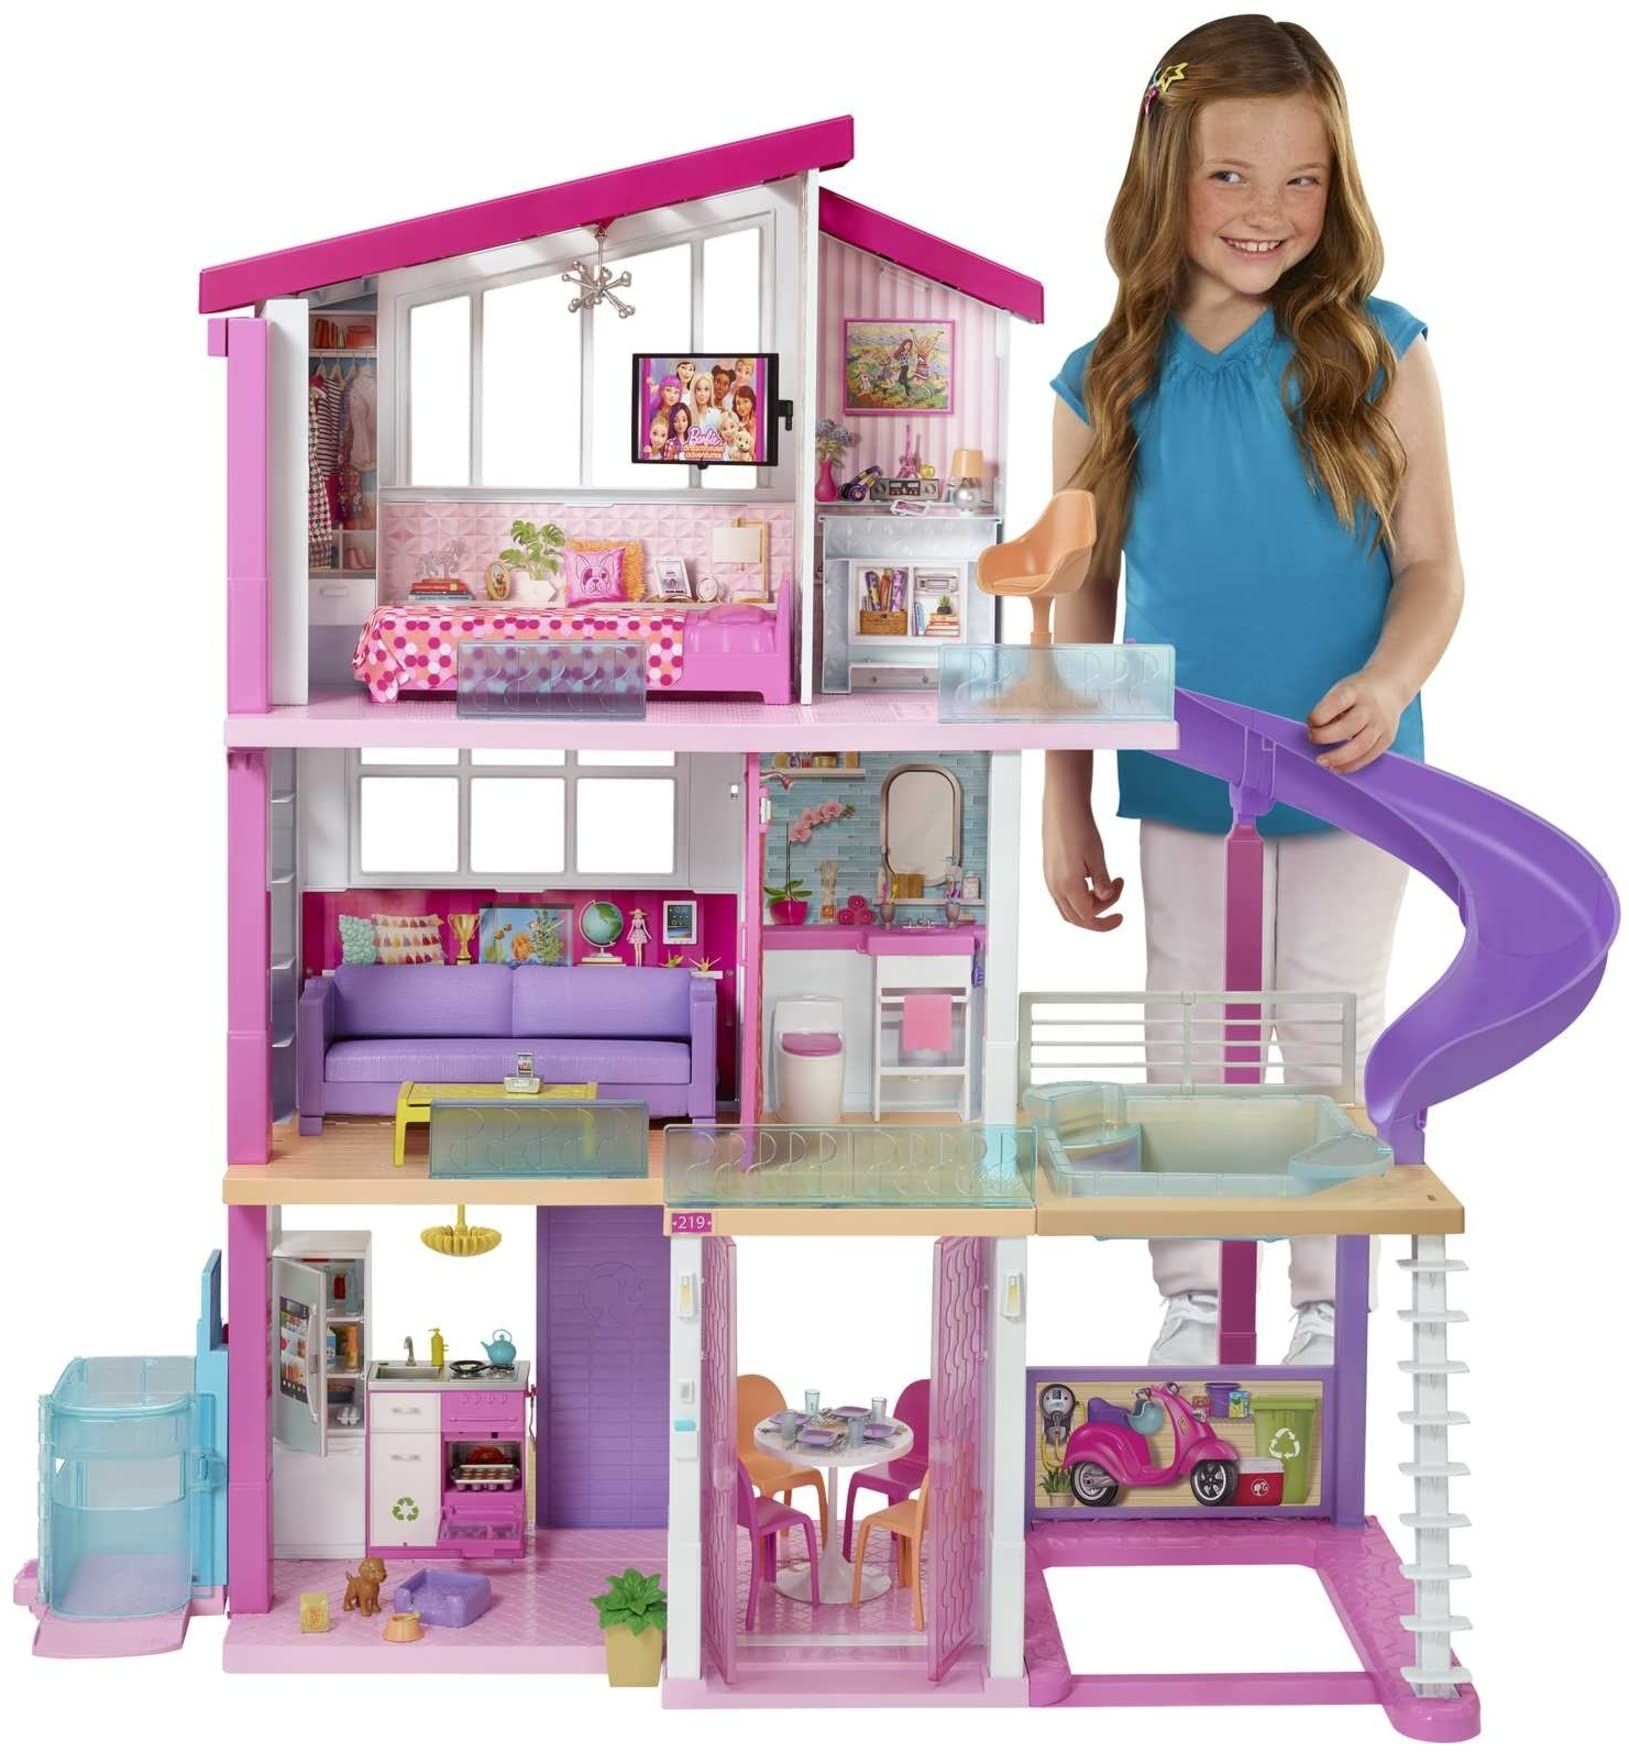 Discounted Barbie Home and more in Argos toy sale - Manchester